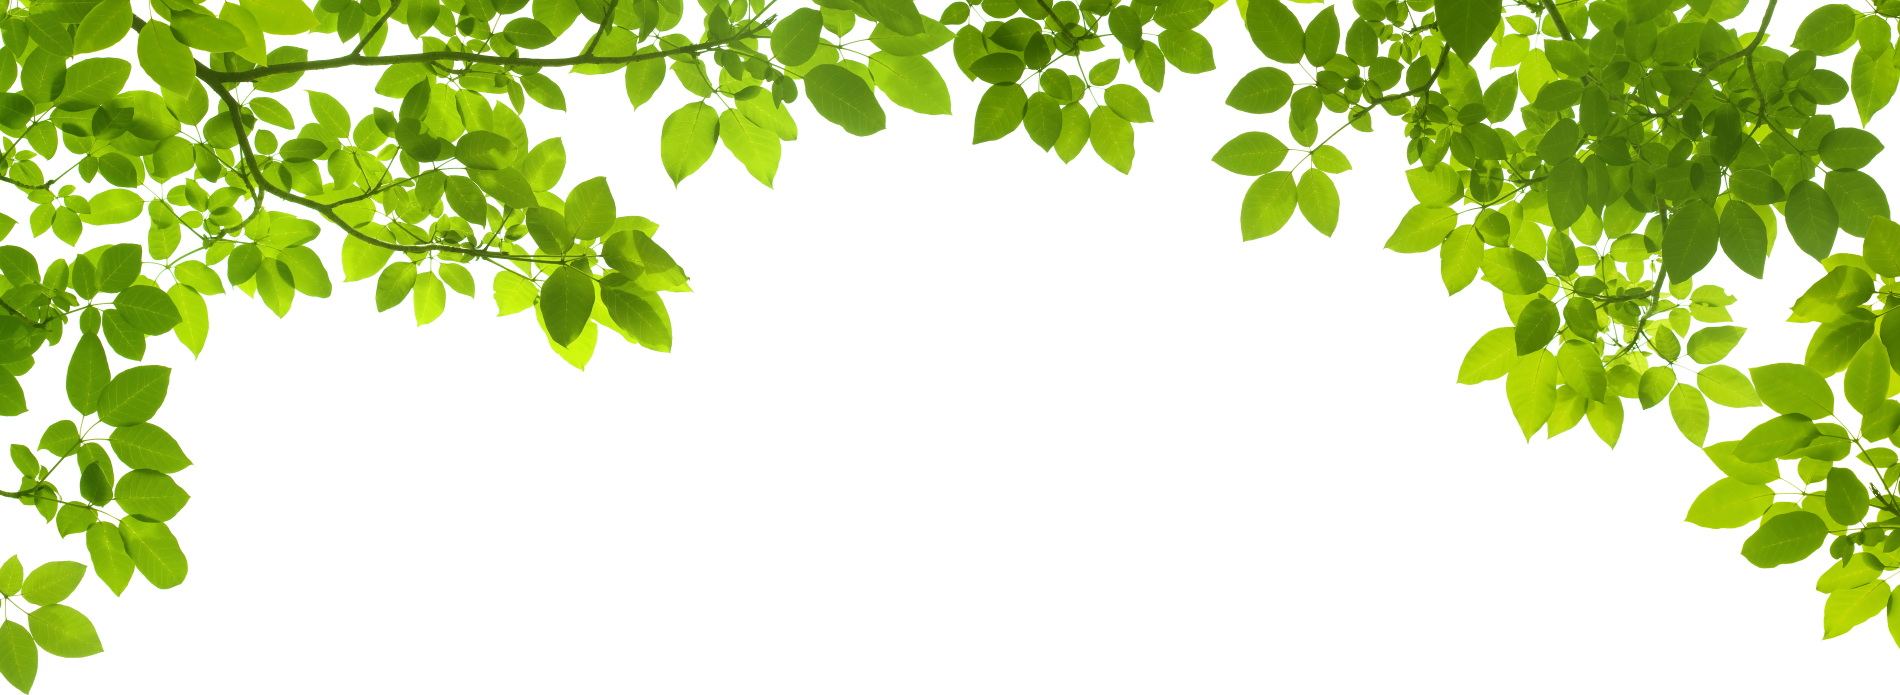 Gambar Background Daun 3D Green leafs png 44853 Free Icons and PNG Backgrounds 